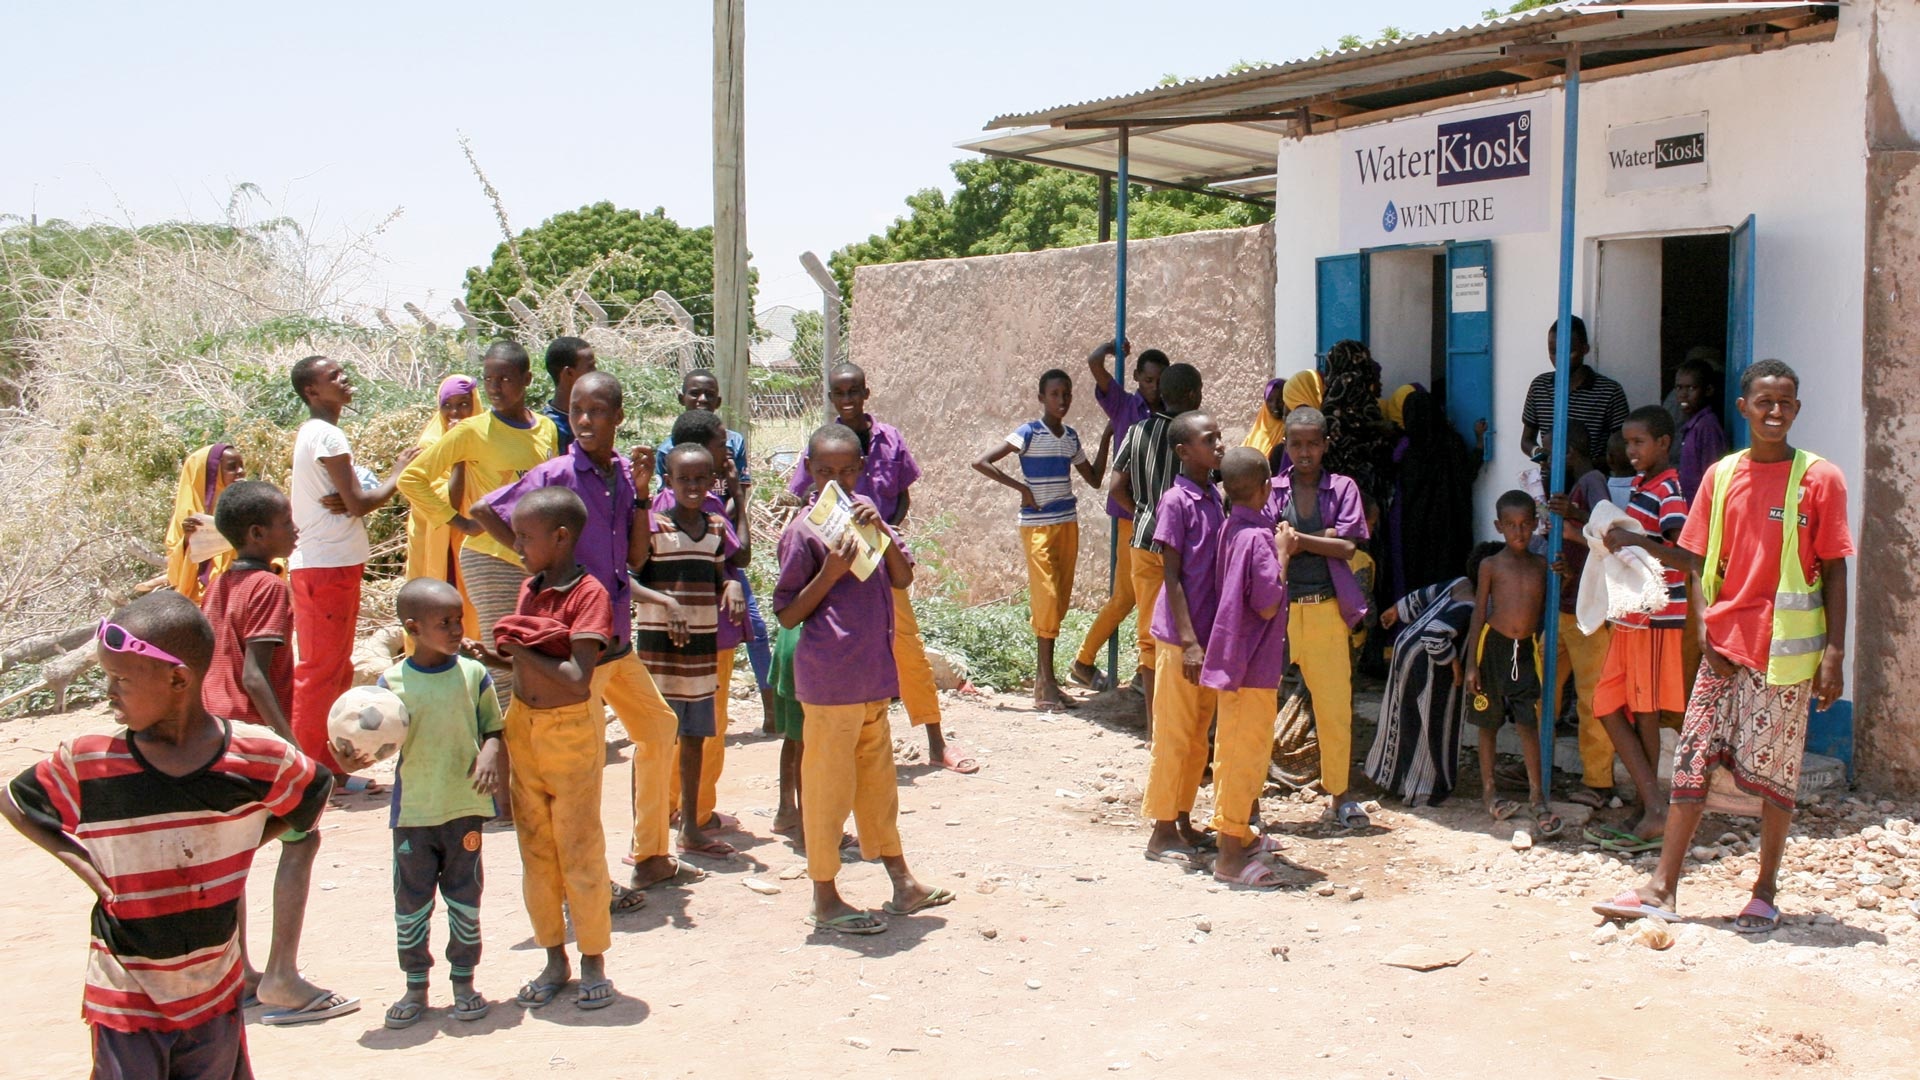 A large group of Kenyan schoolboys stands in front of a WaterKiosk.